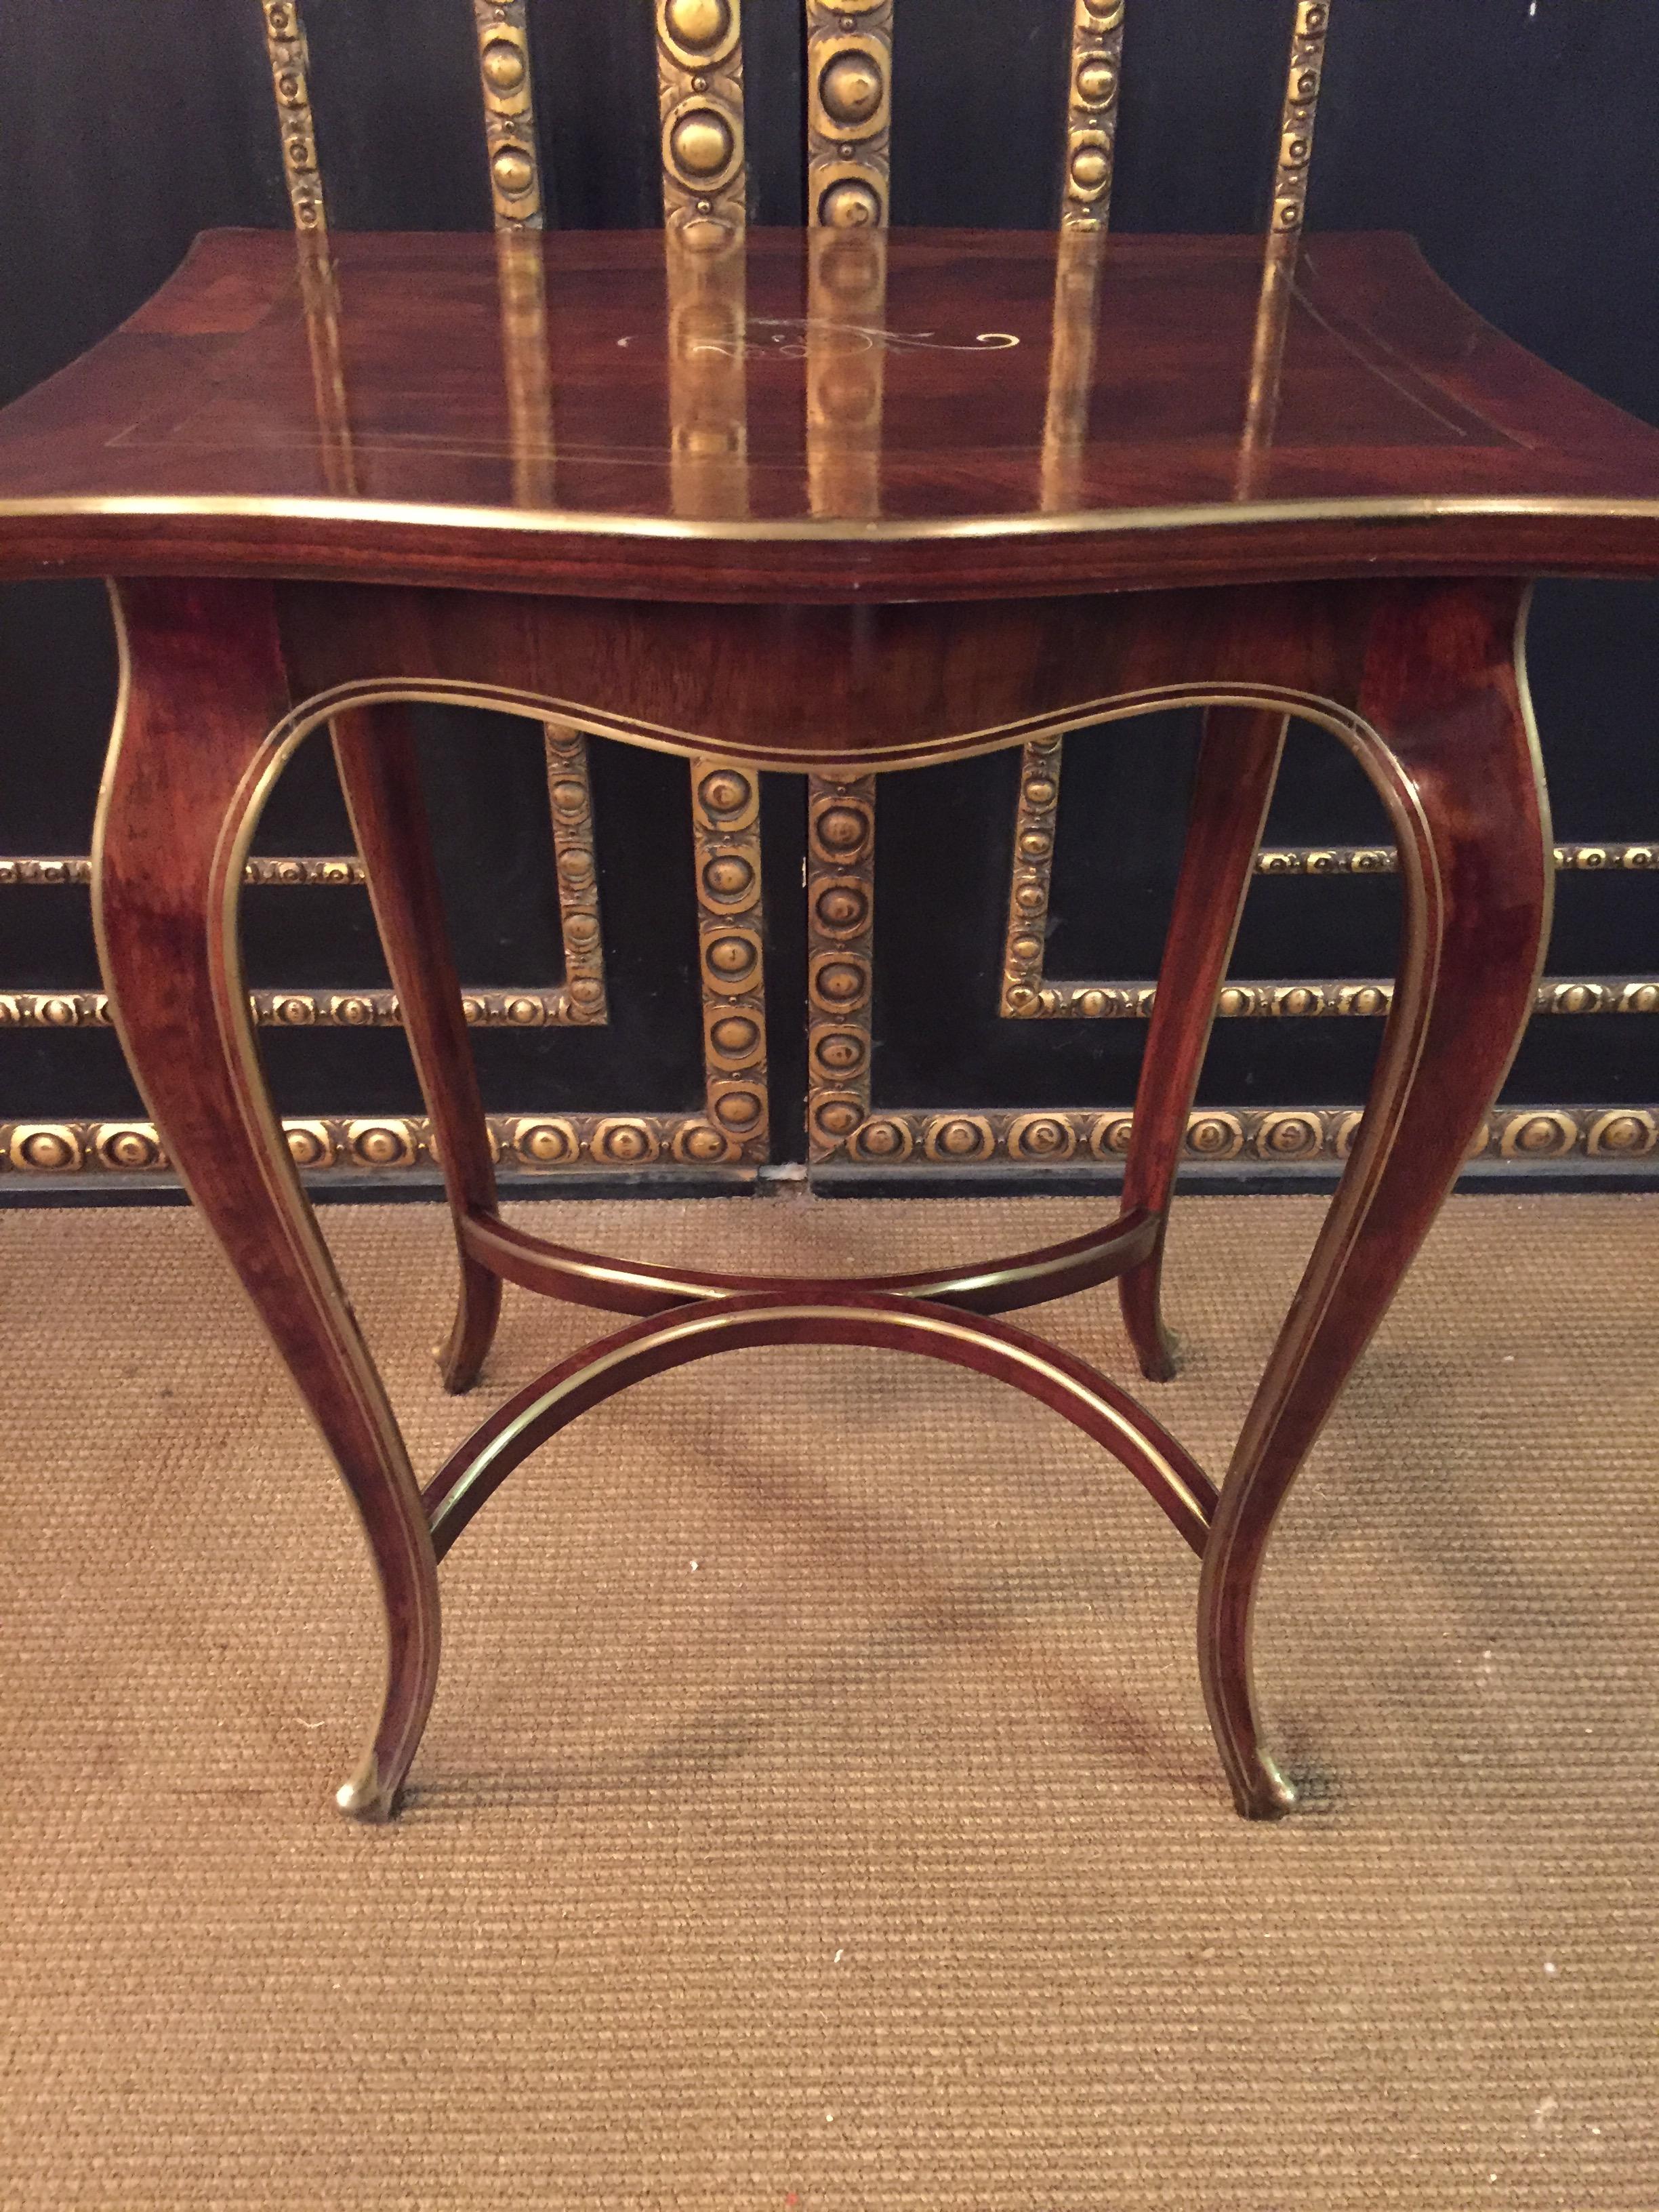 Antique Biedermeier Table Mahogany Inlaid with Mother Pearl 1870 1